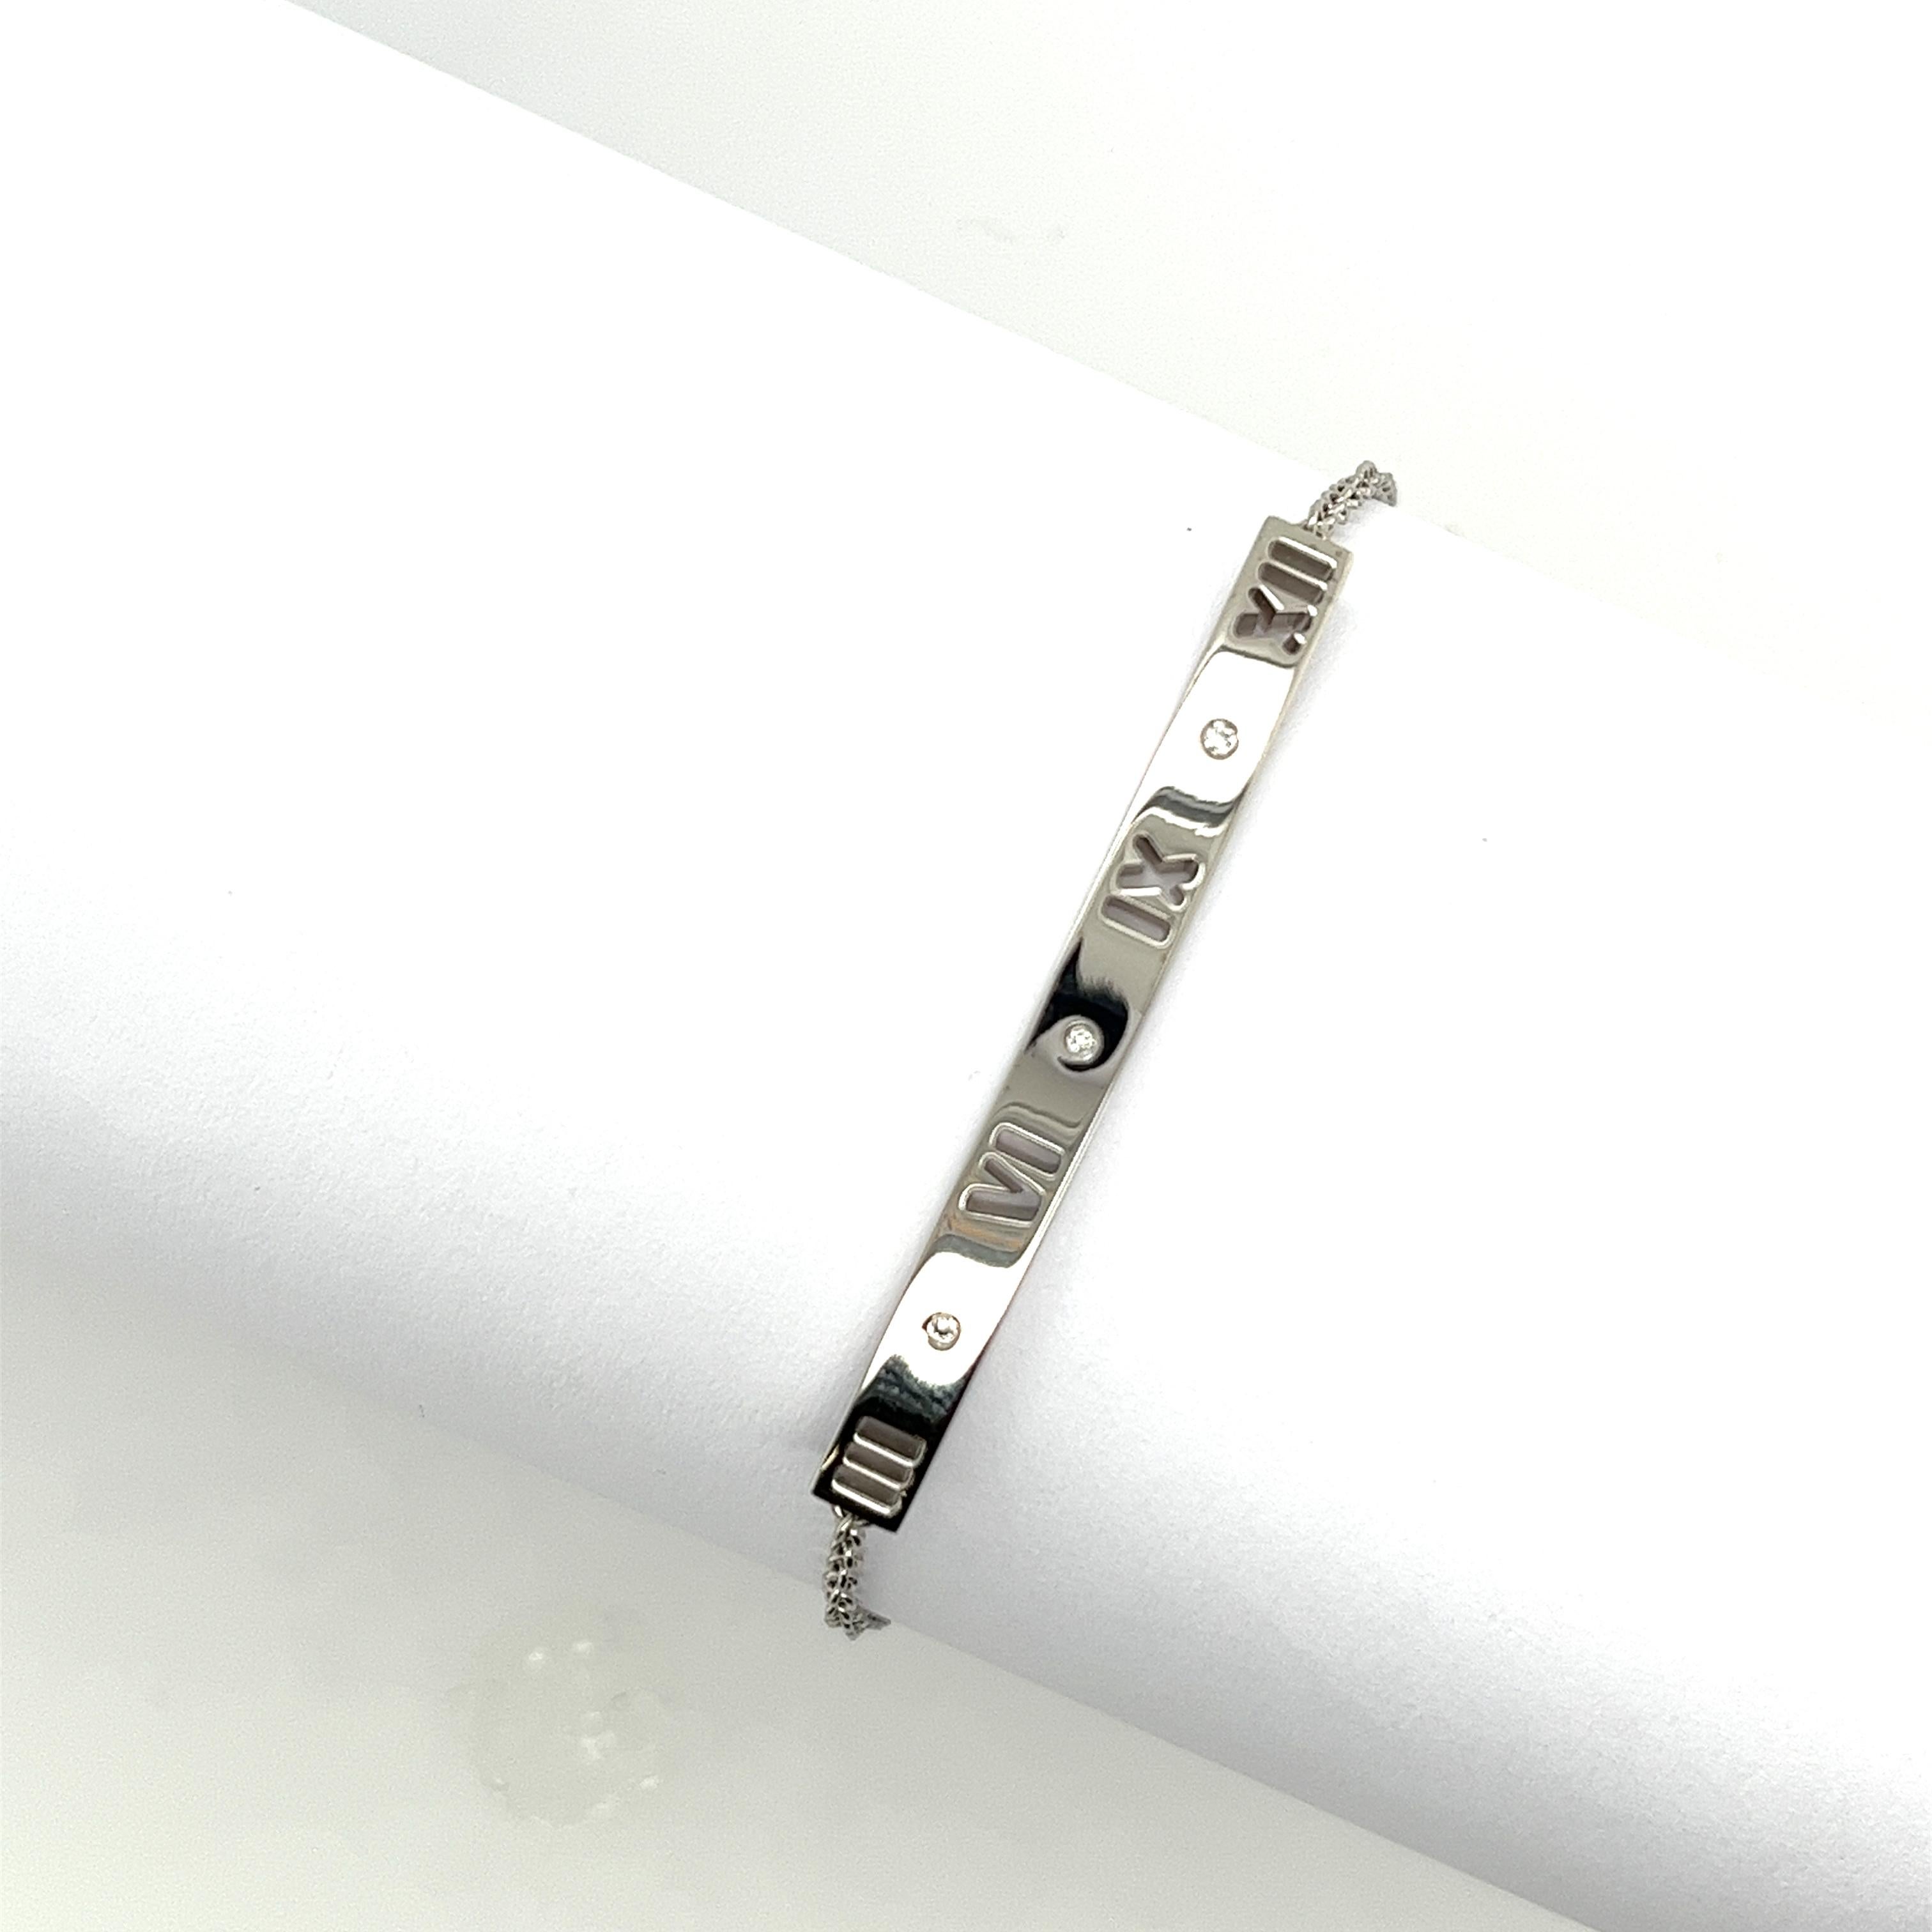 The Tiffany & Co. Atlas Pierced Diamond bracelet is a stunning piece of jewellery crafted from 18ct white gold. This elegant bracelet features the iconic Atlas design, 
with a delicate pierced diamond motif that adds a touch of sparkle to any